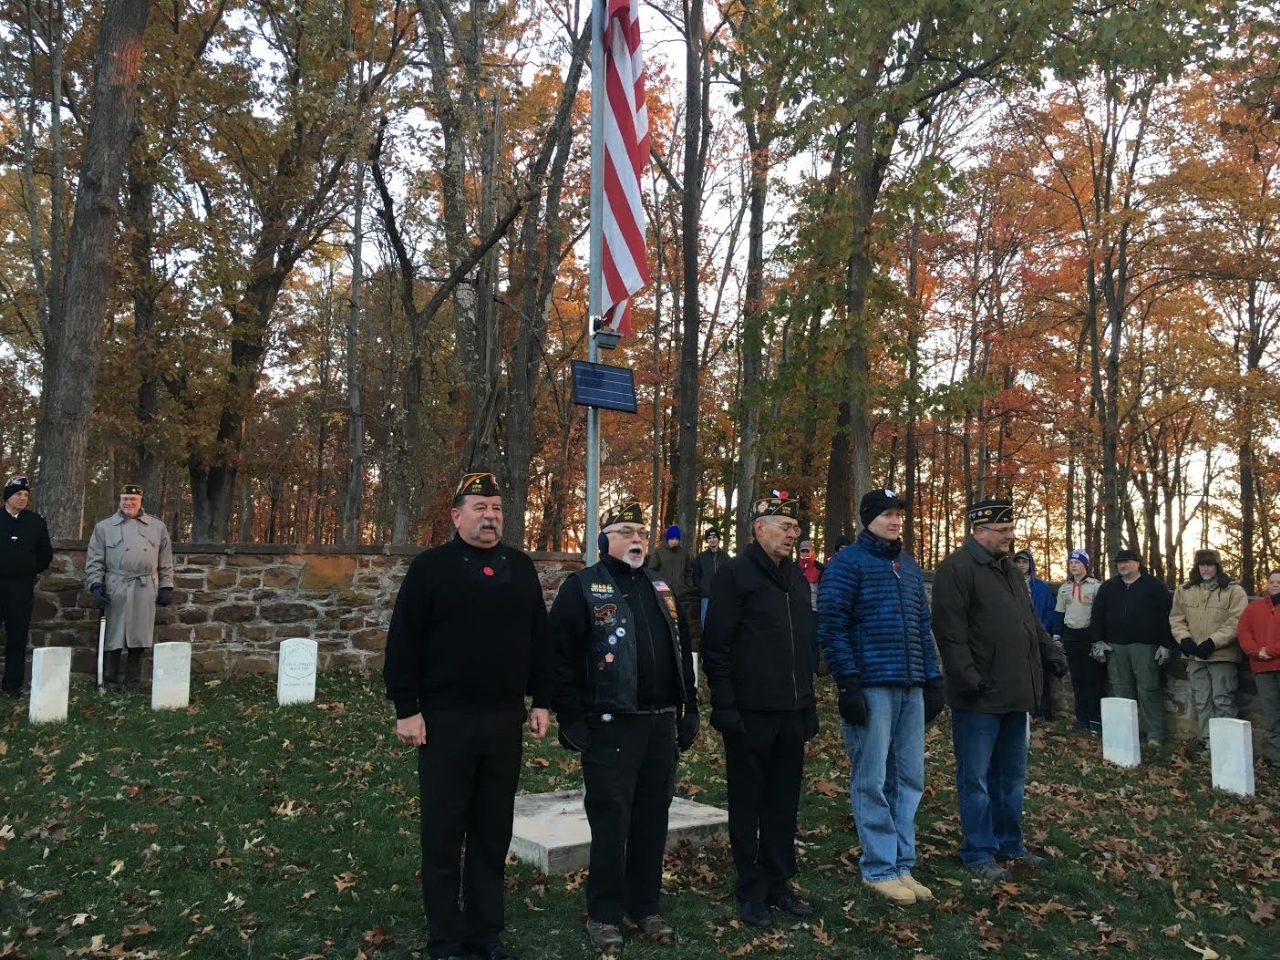 At the Veterans Day Sunrise Ceremony at Balls Bluff.